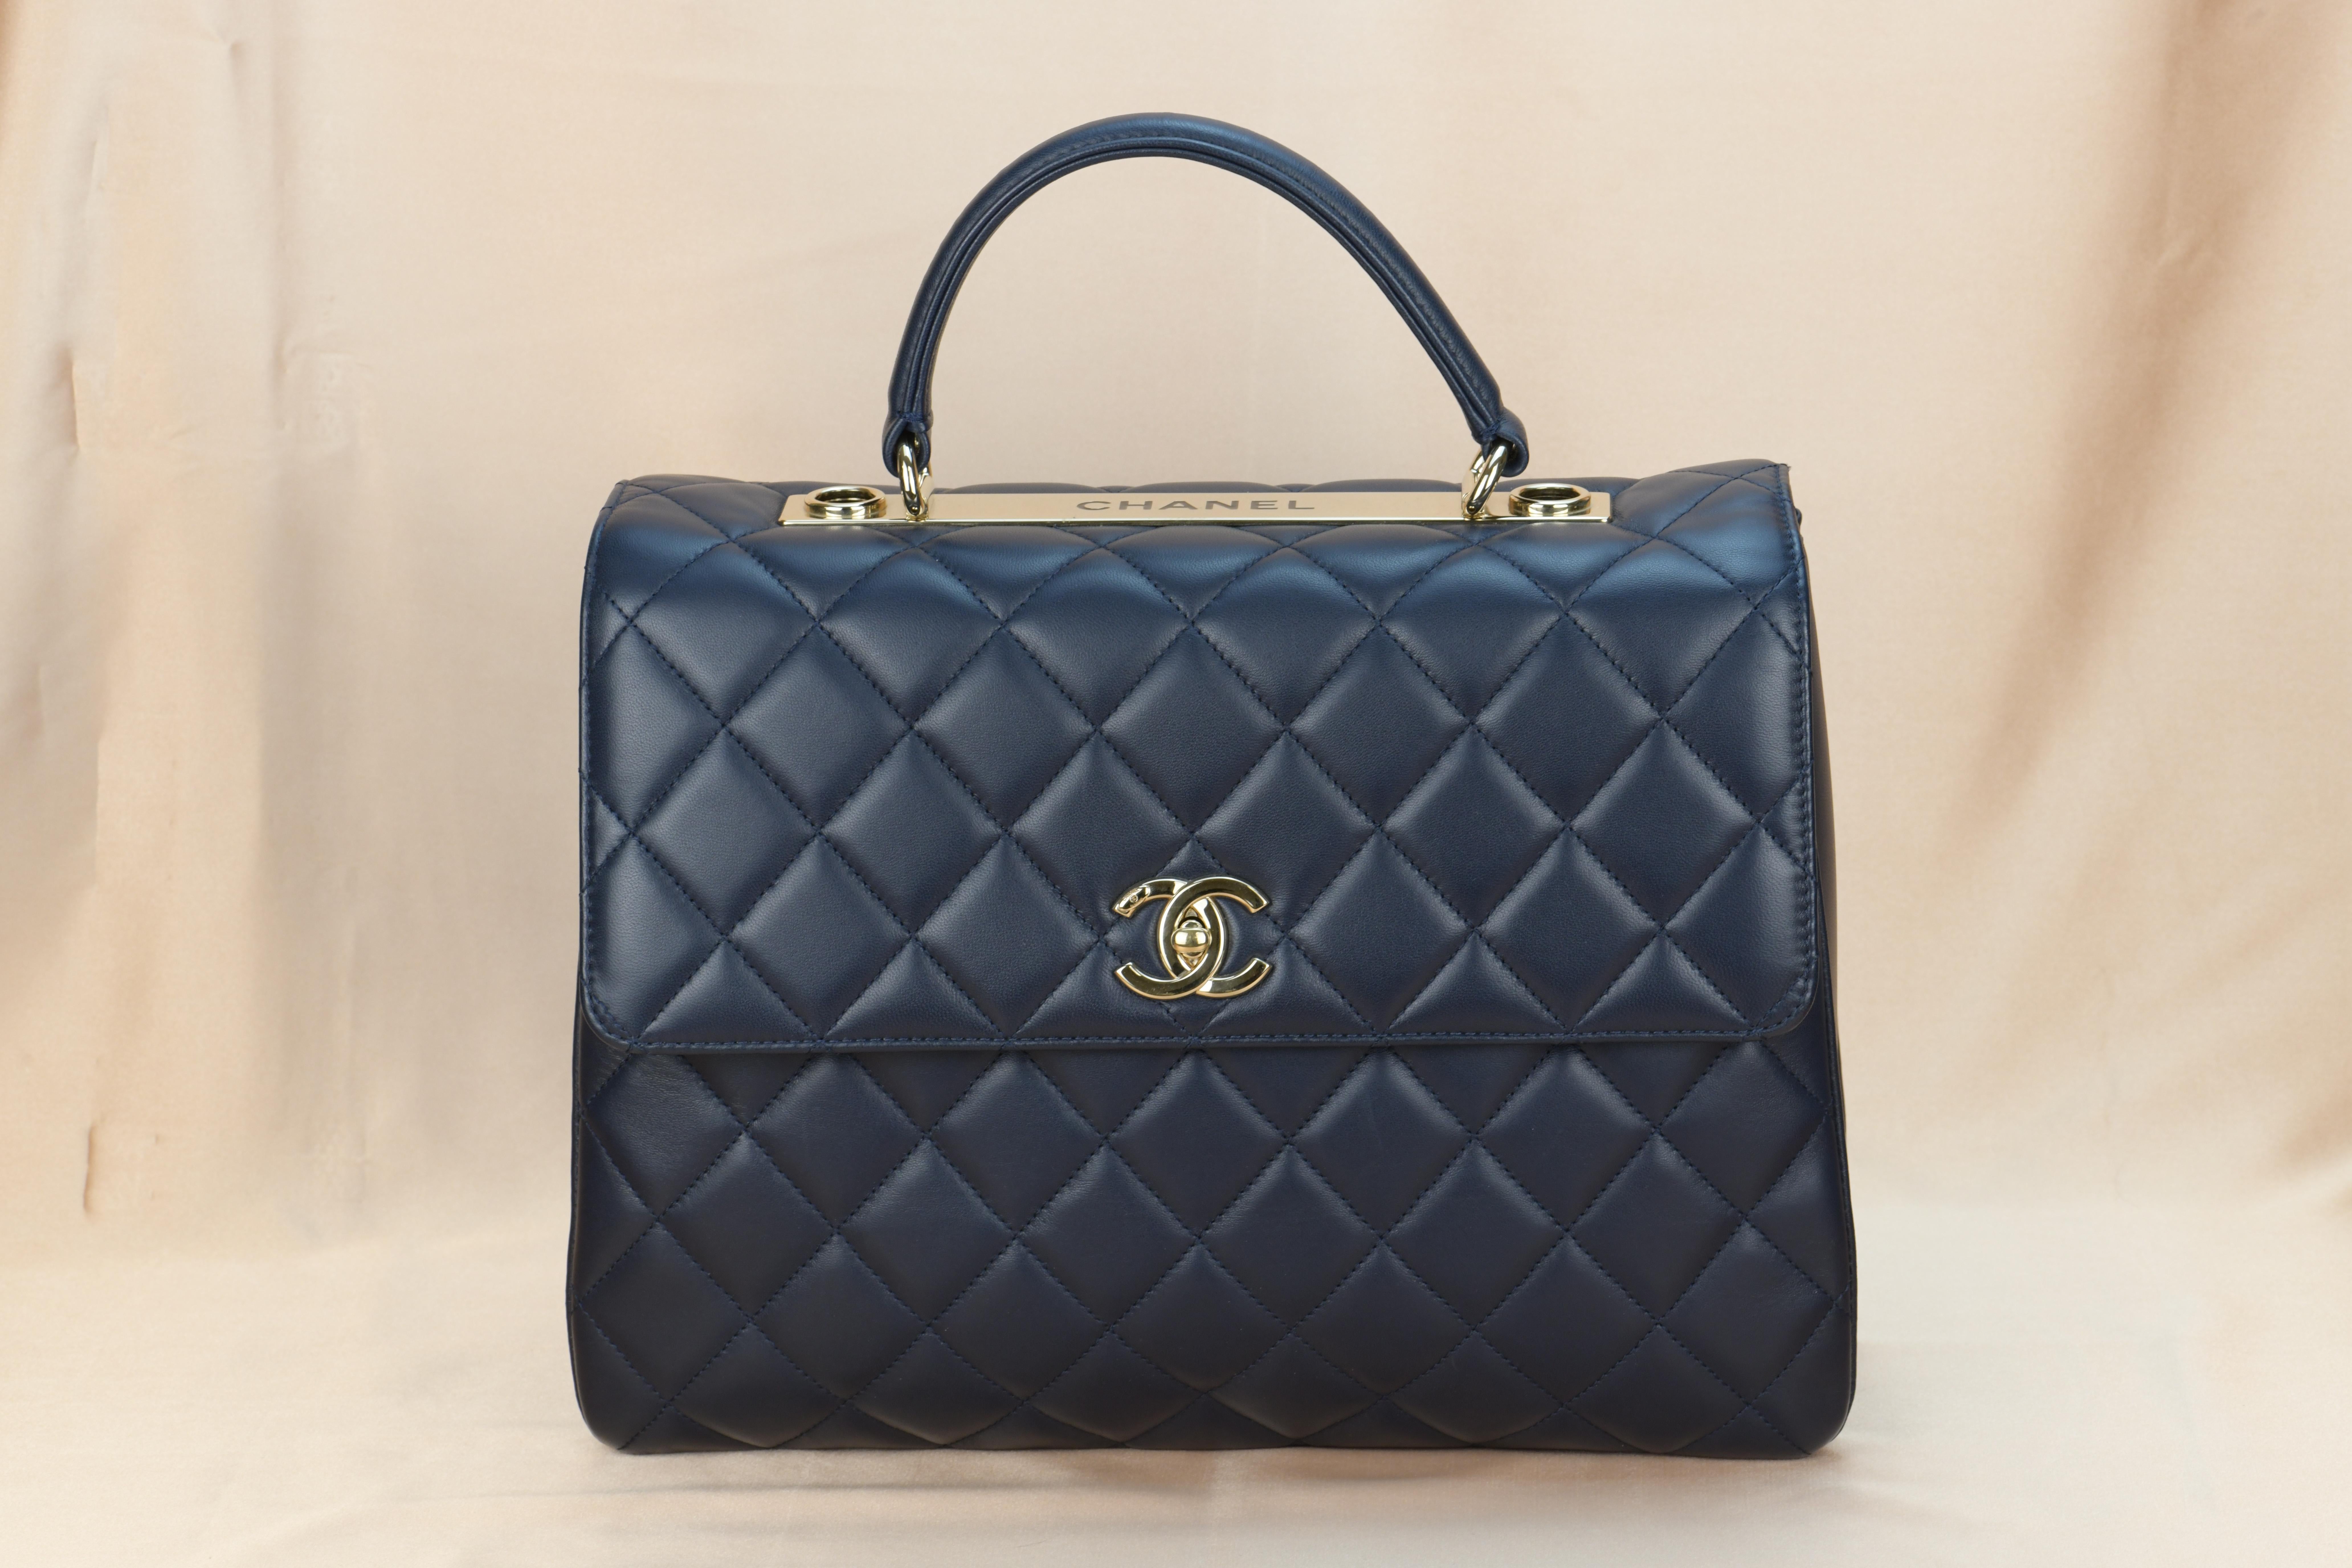 Dandelion Code	AT-1120
Brand	Chanel
Model	Trendy CC Top Handle
Serial No.	20******
Color	Navy Blue
Date	Approx. 2014
Metal	Gold
Material	Lambskin Leather
Measurements	Approx. 26  x 31 x 16cm
Condition	Excellent 
Comes with	Chanel Dust bag / Chanel